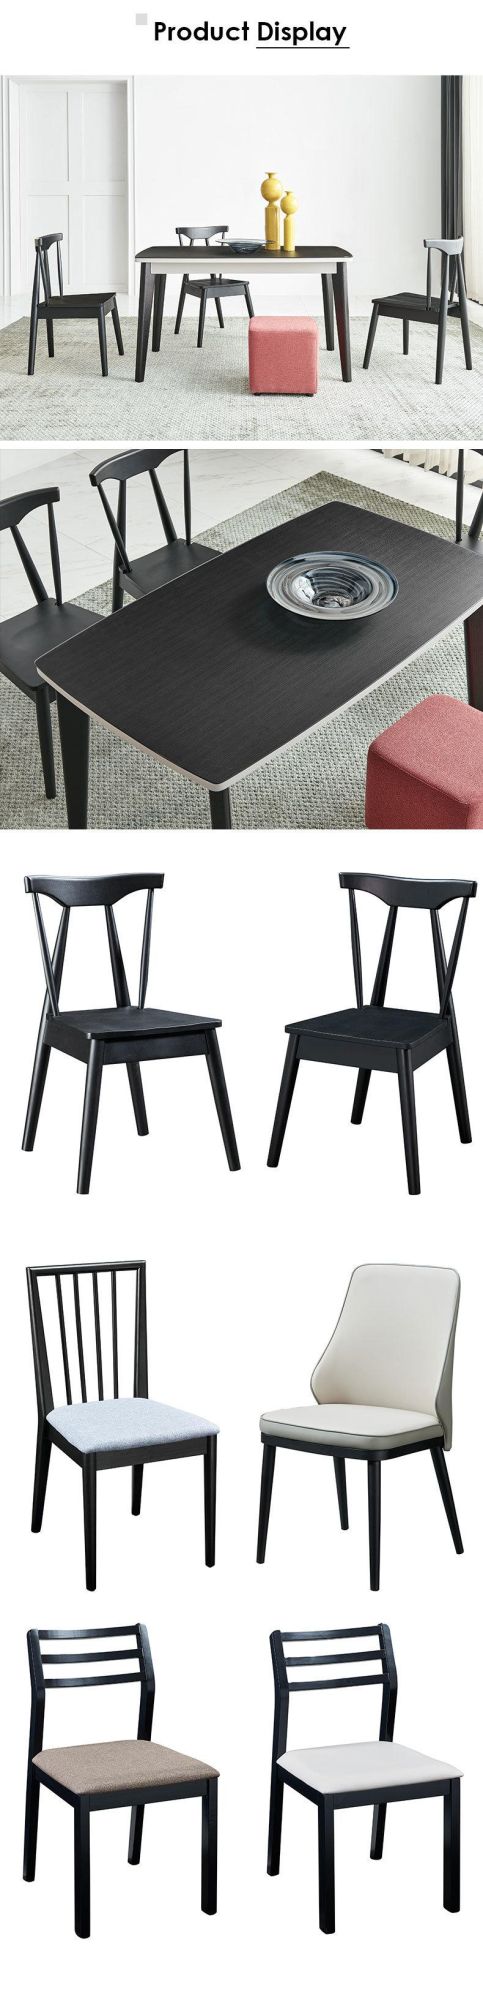 Modern Furniture Dining Room Furniture Dining Chair